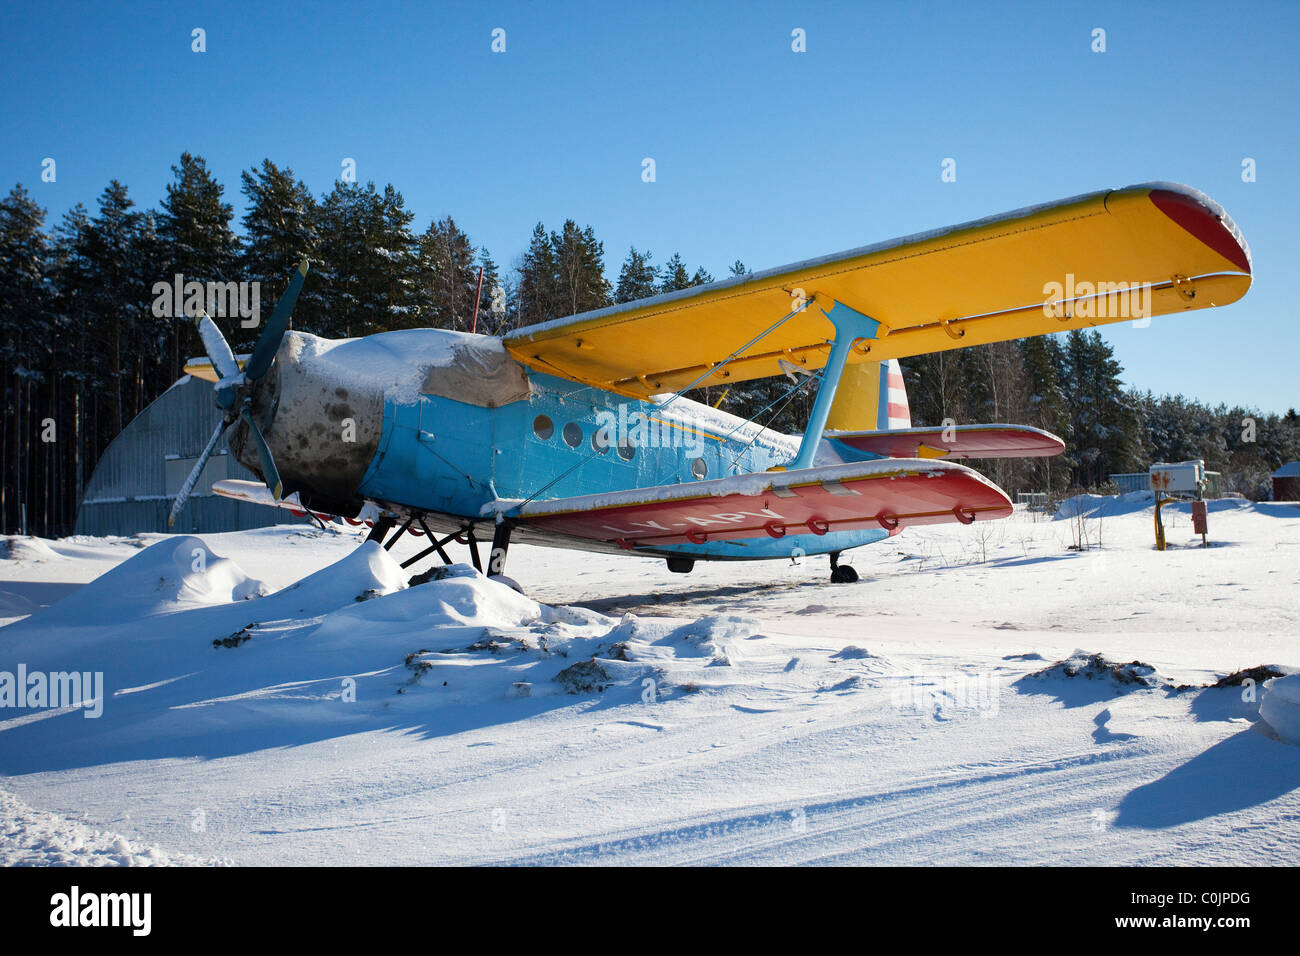 Old double-decker aeroplane standing in the snow Stock Photo